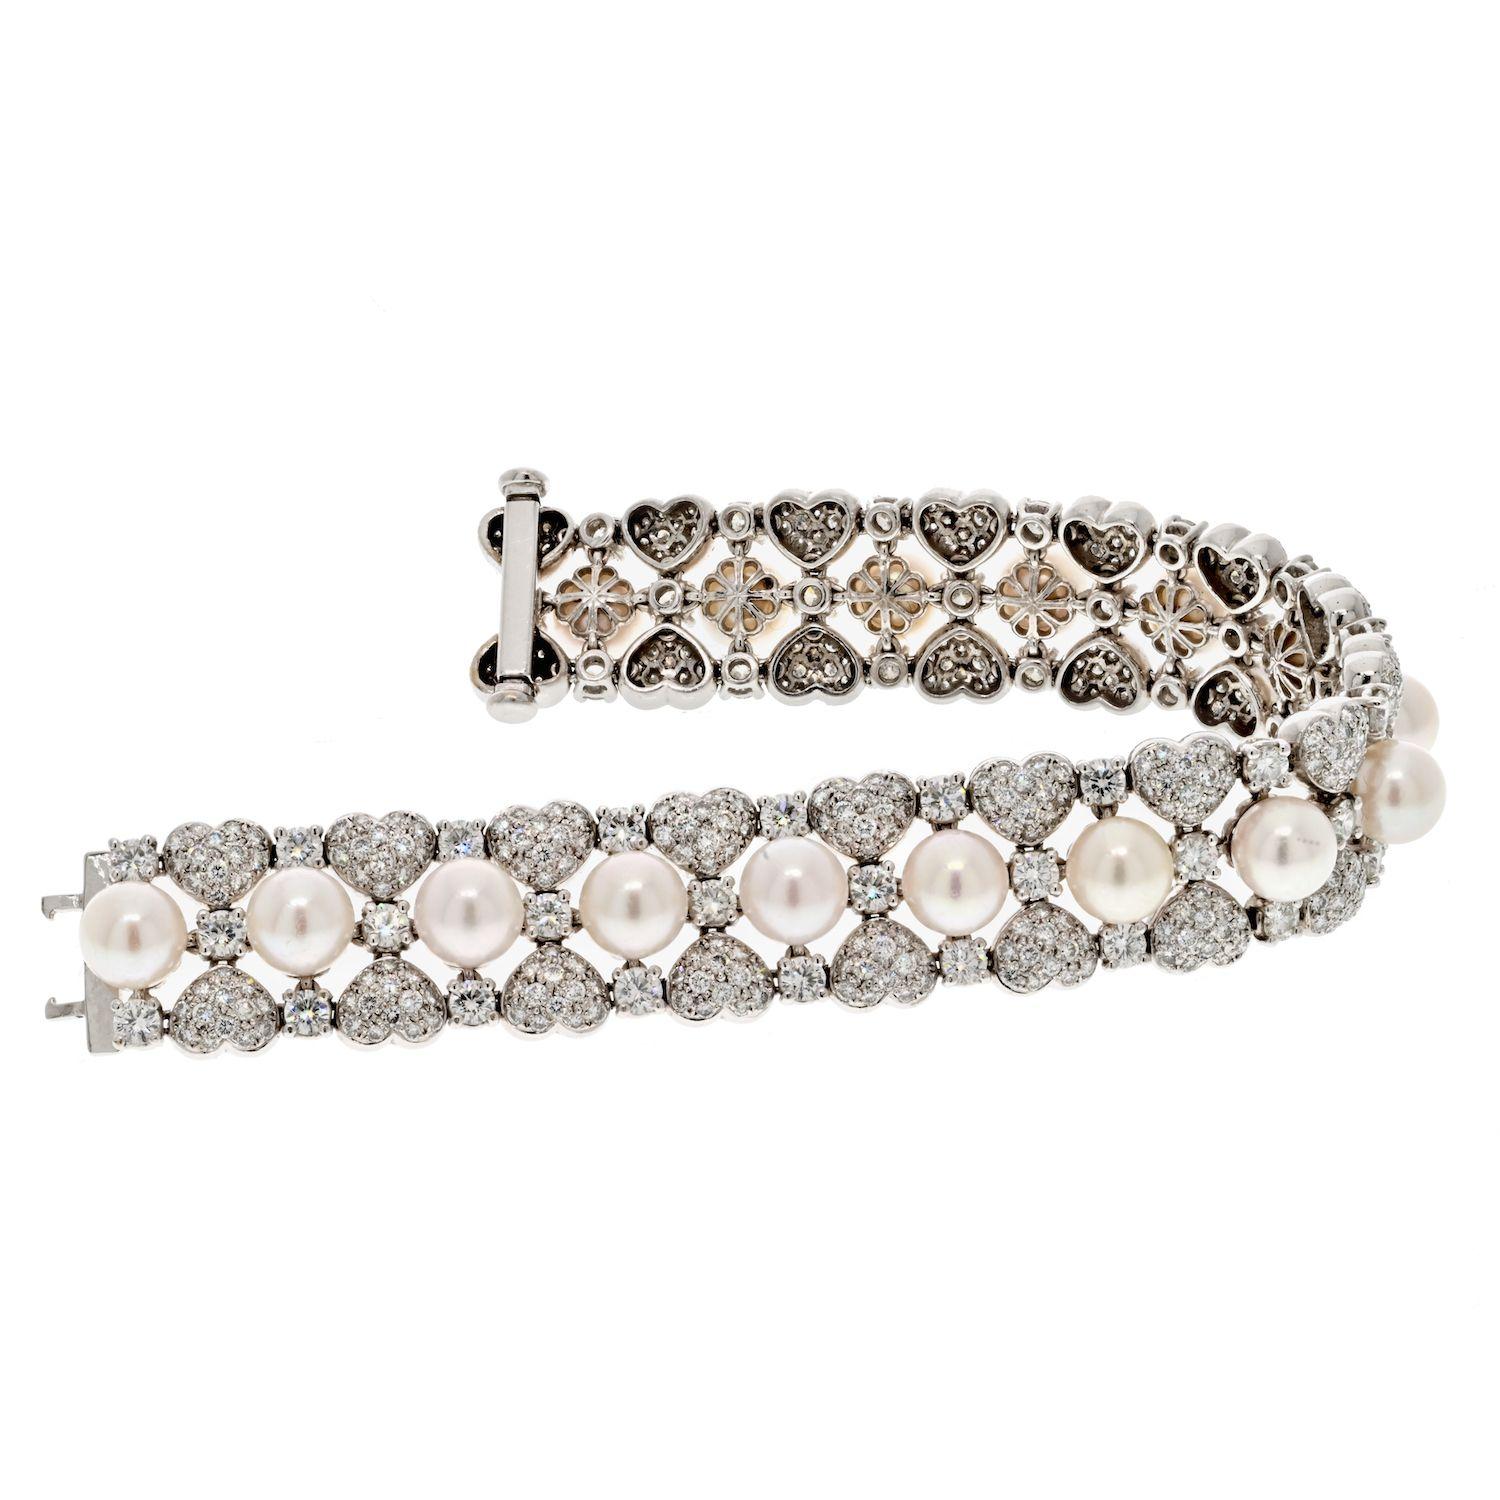 The 18K White Gold 15.00cttw Round Diamond And Pearl One Line Bracelet is a stunning piece that seamlessly combines the elegance of diamonds with the timeless beauty of pearls. Crafted in lustrous 18K white gold, this bracelet features pave set